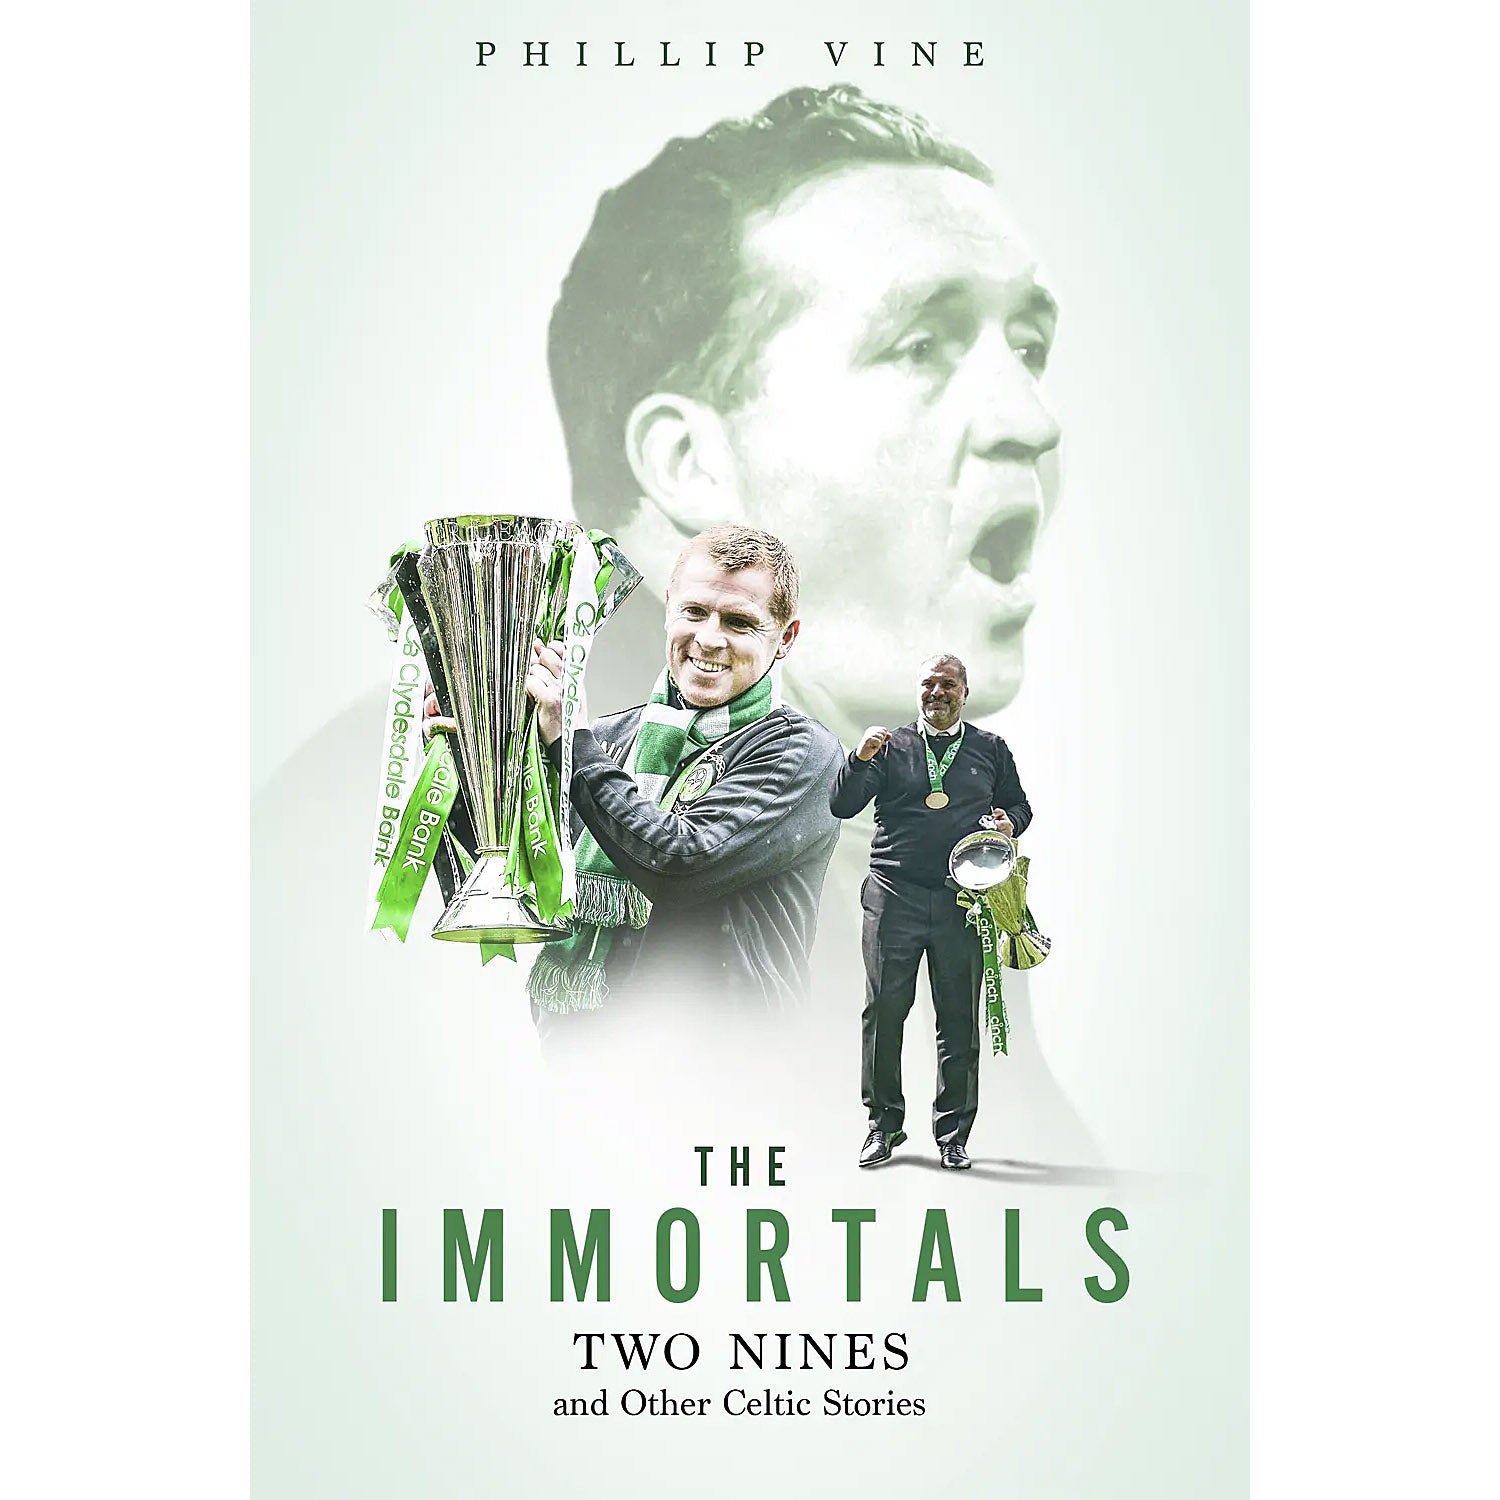 The Immortals – Two Nines and Other Celtic Stories